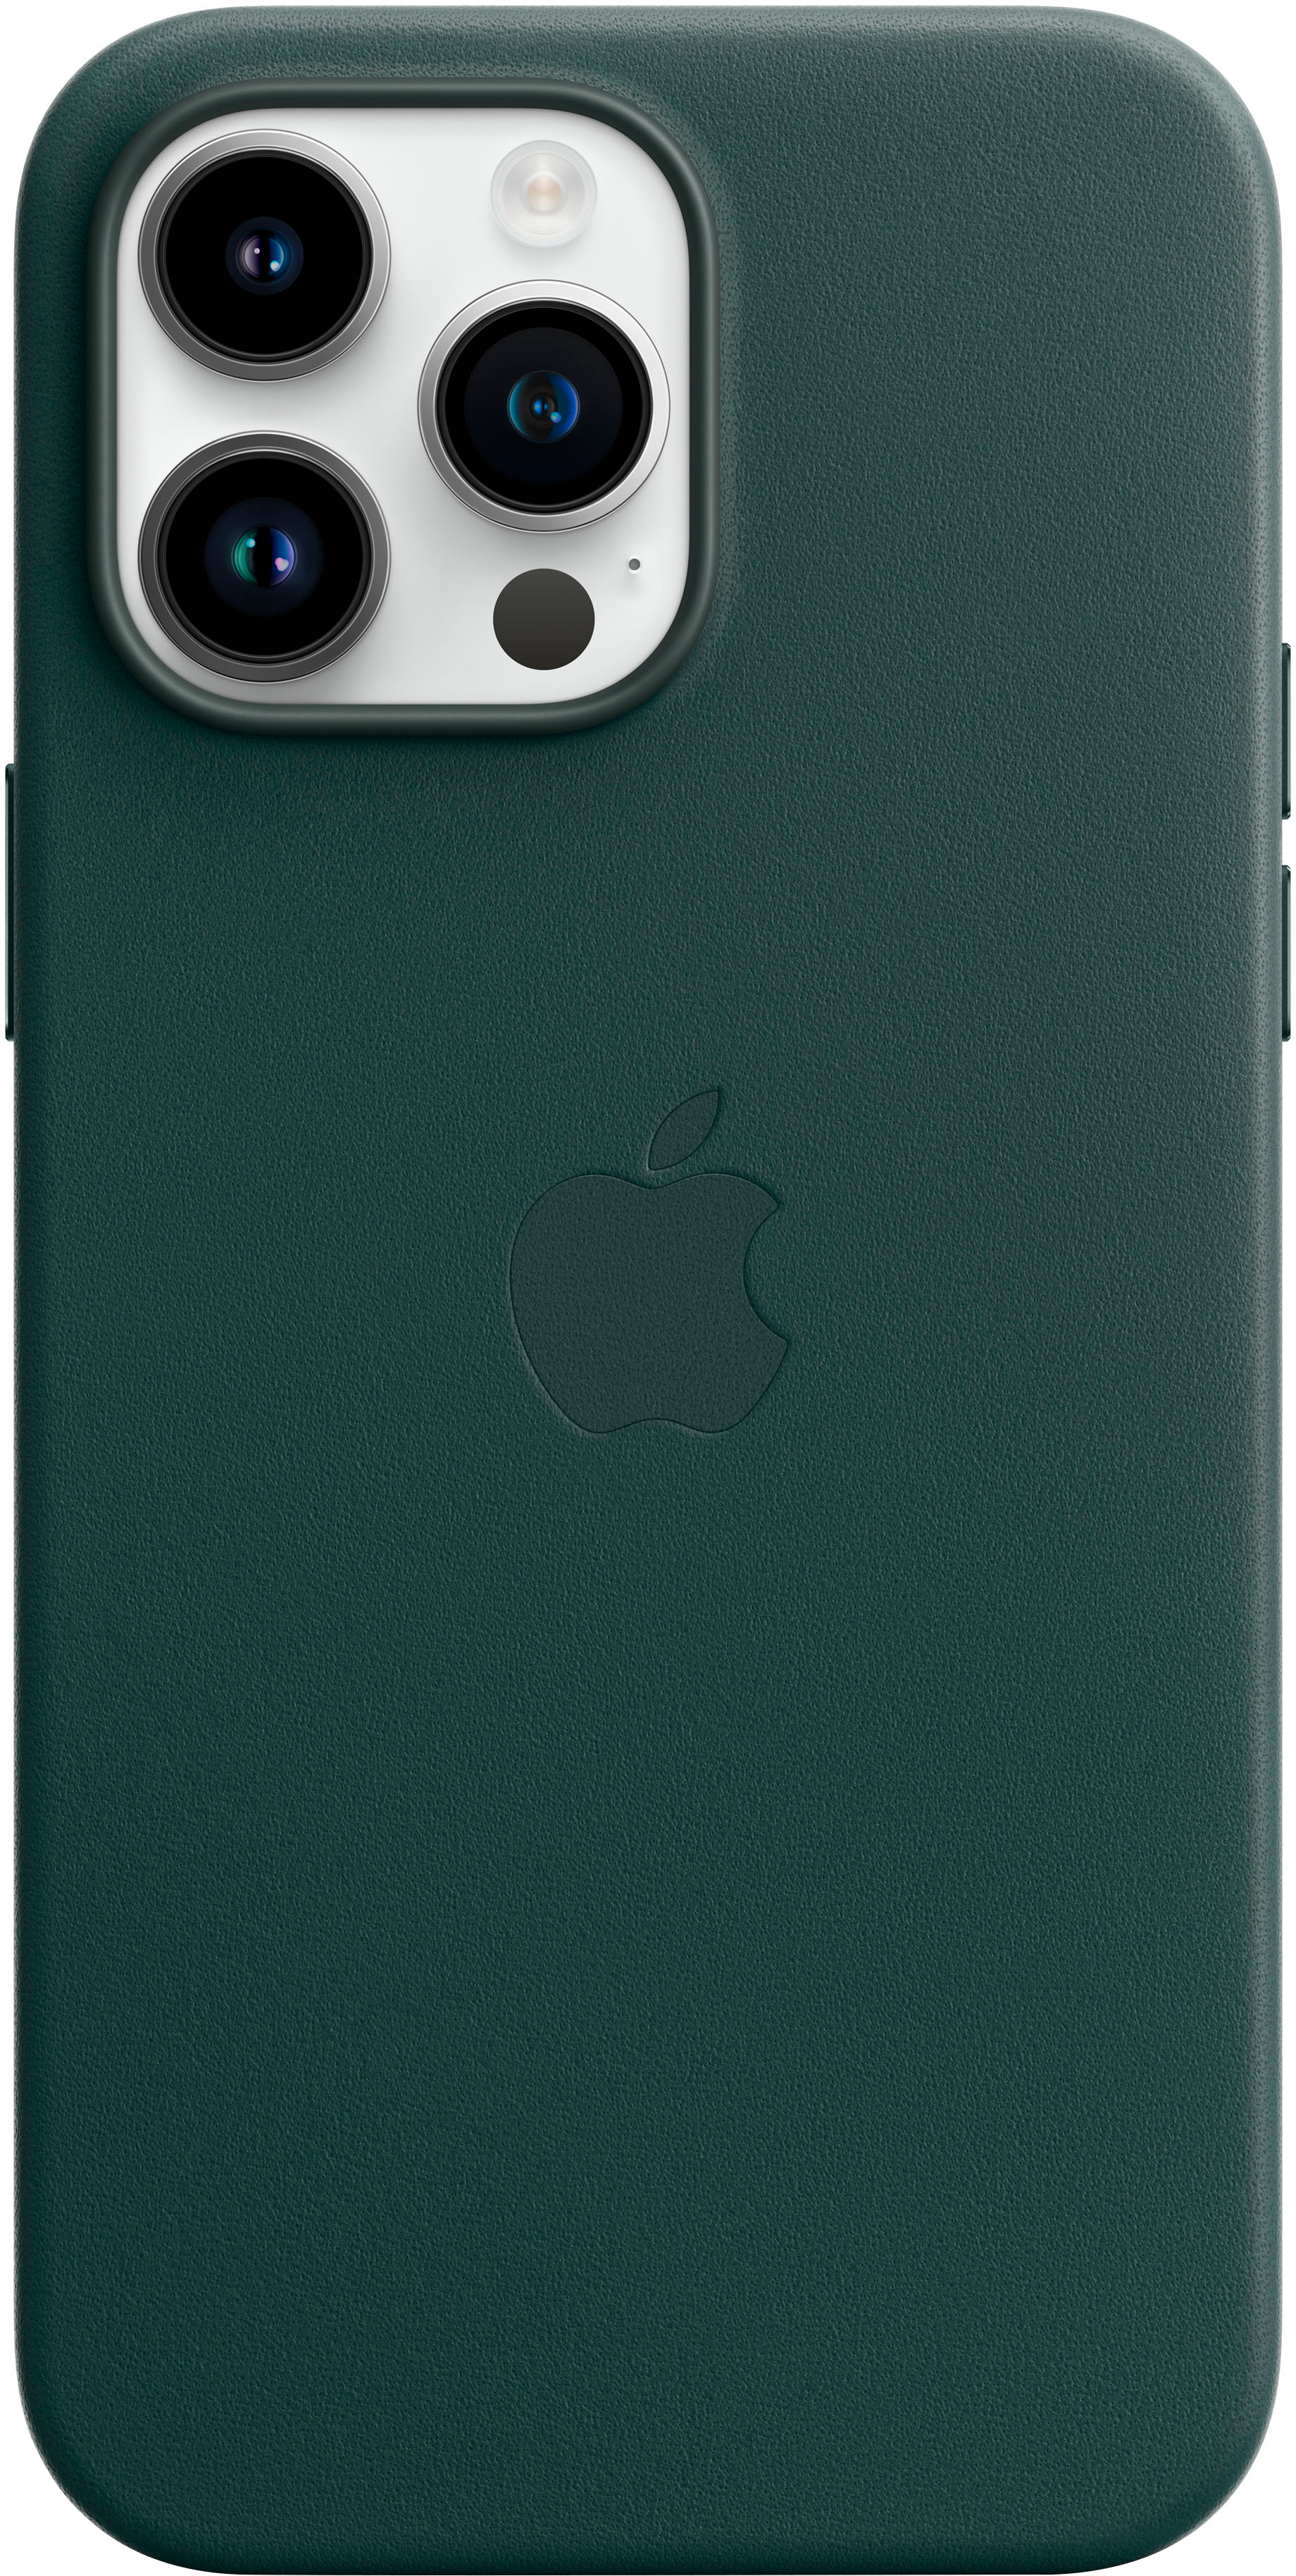 Best iPhone 14 Pro Max cases to protect your phone